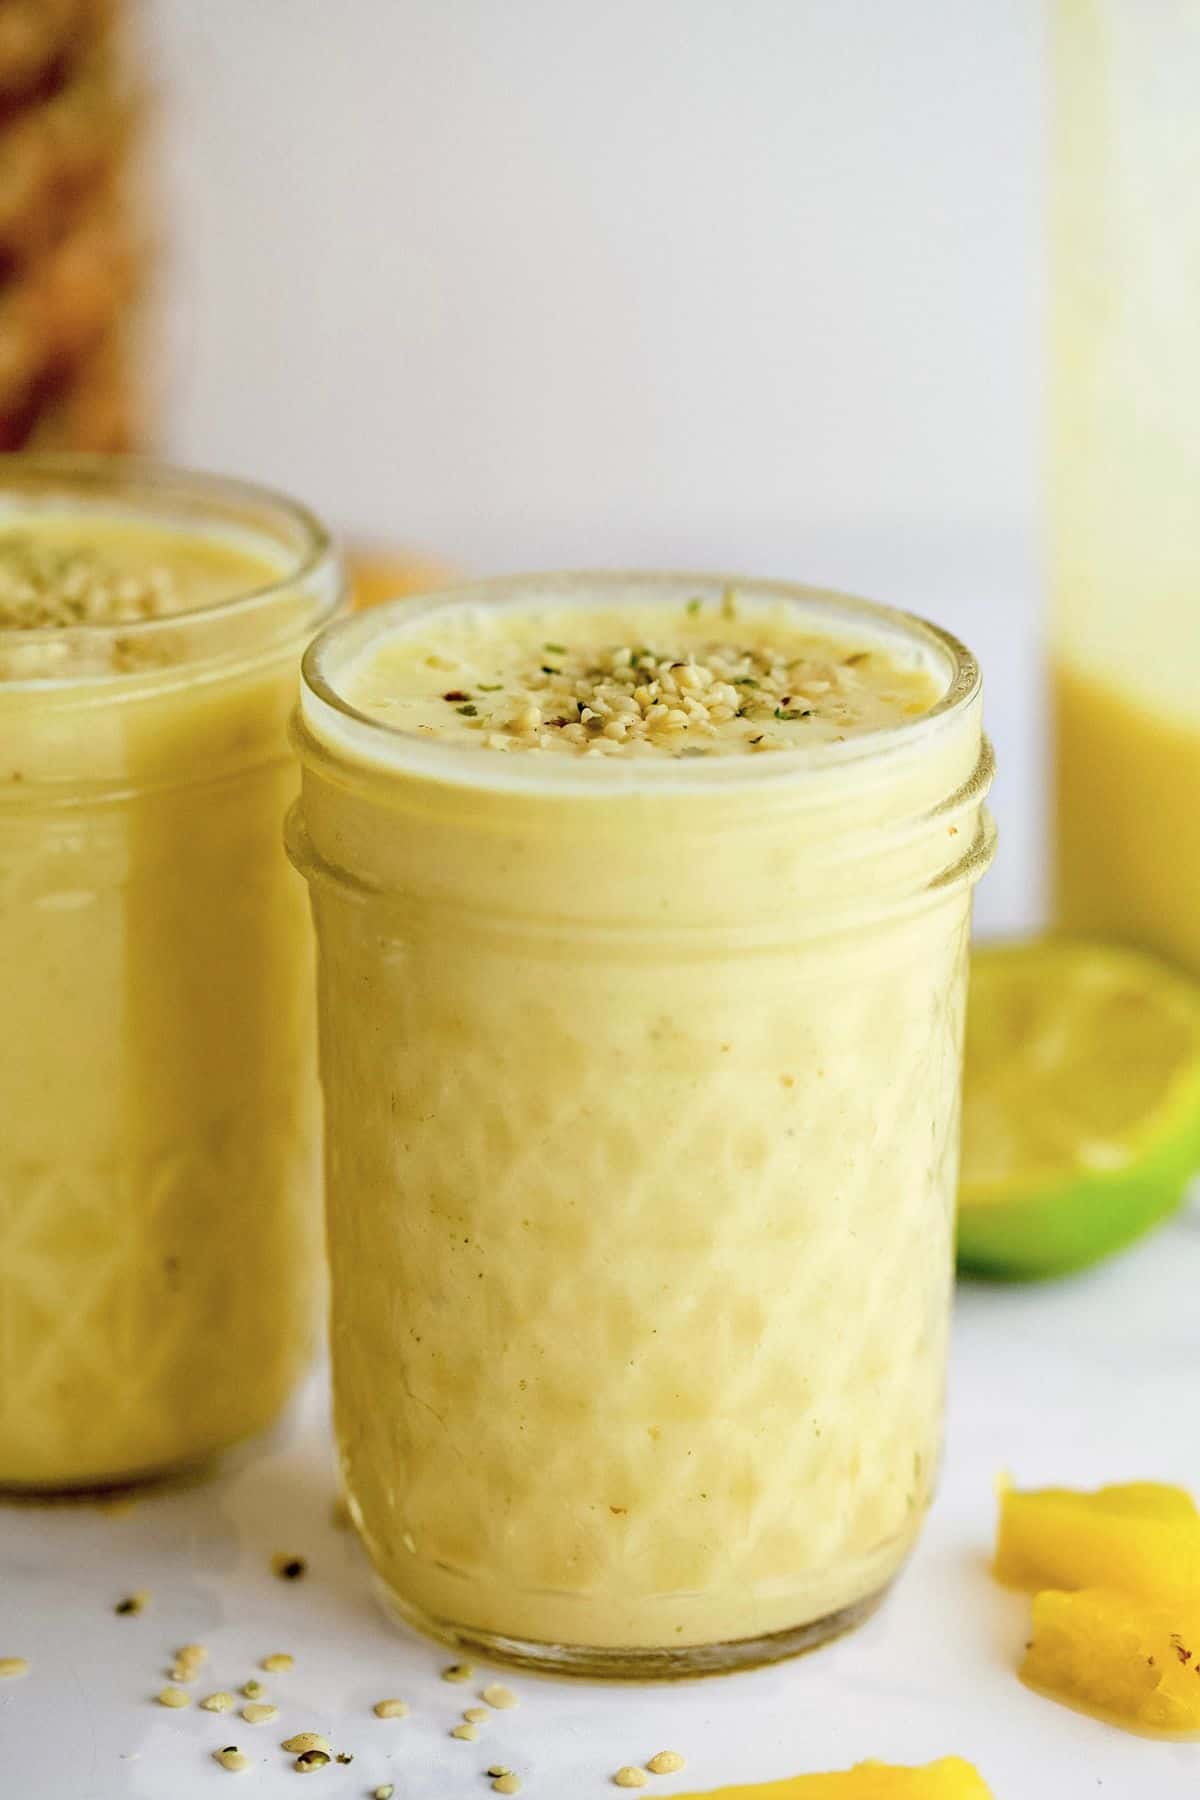 Two glass jars filled with pale yellow coloured drink topped with hemp seeds. Diced pineapple and half a lime by the jars.